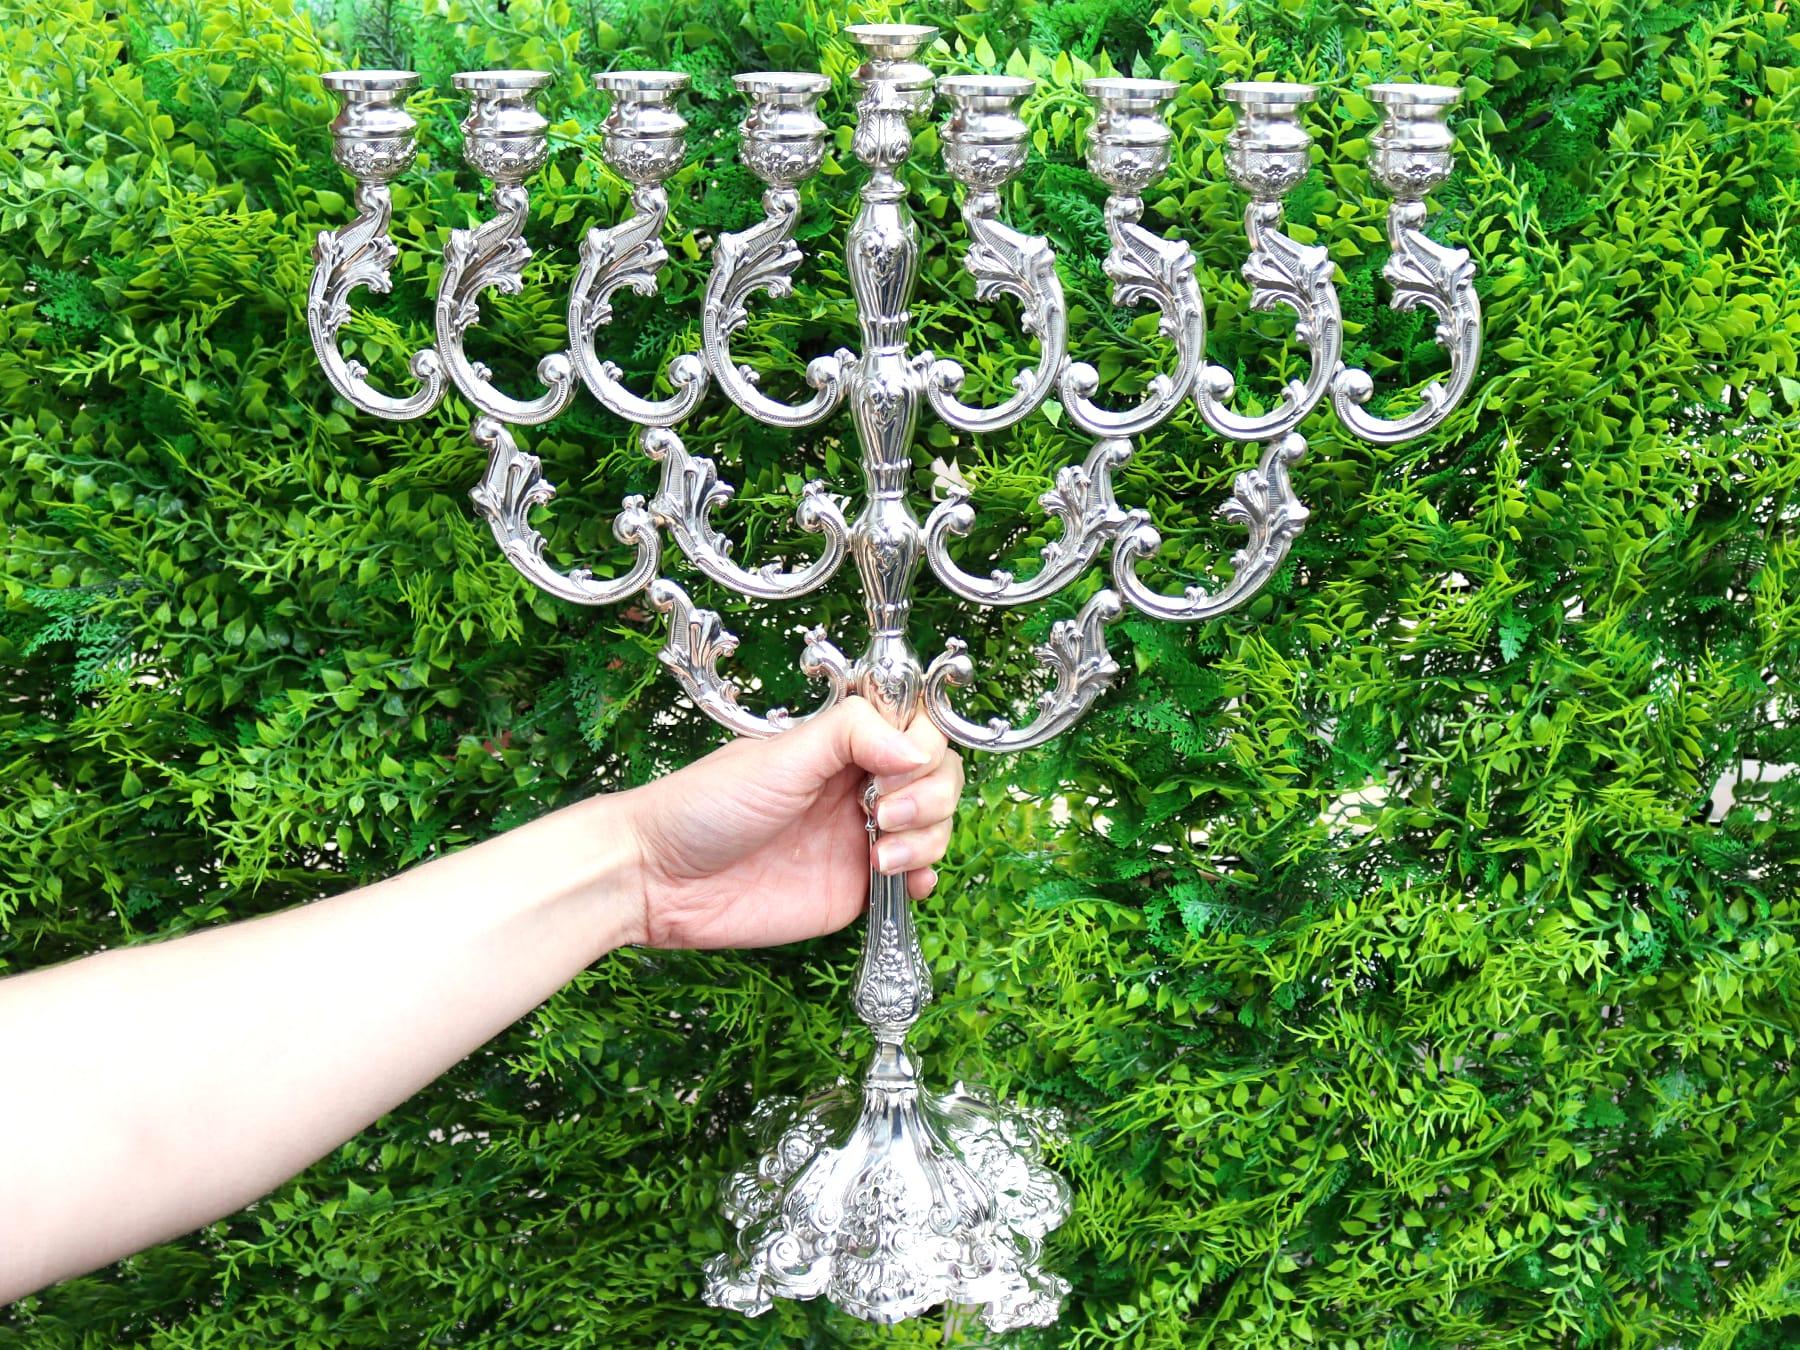 An exceptional, fine and impressive vintage European sterling silver Hanukkiah; an addition to our ornamental silverware collection

This exceptional vintage sterling silver hanukkiah* has circular rounded capitals onto a baluster-shaped column